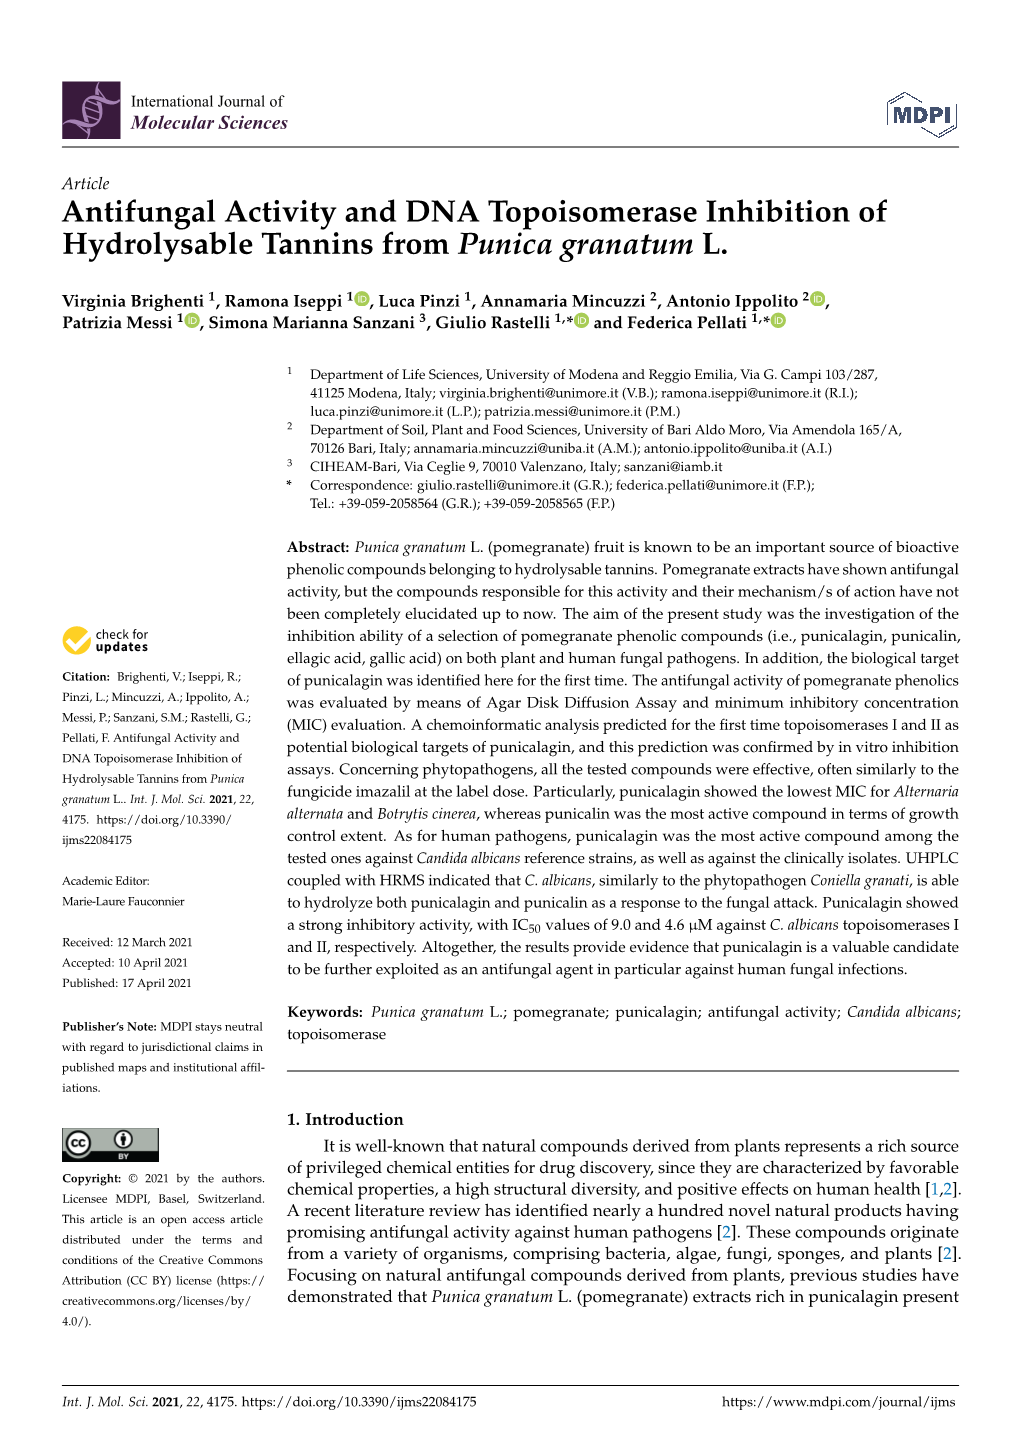 Antifungal Activity and DNA Topoisomerase Inhibition of Hydrolysable Tannins from Punica Granatum L